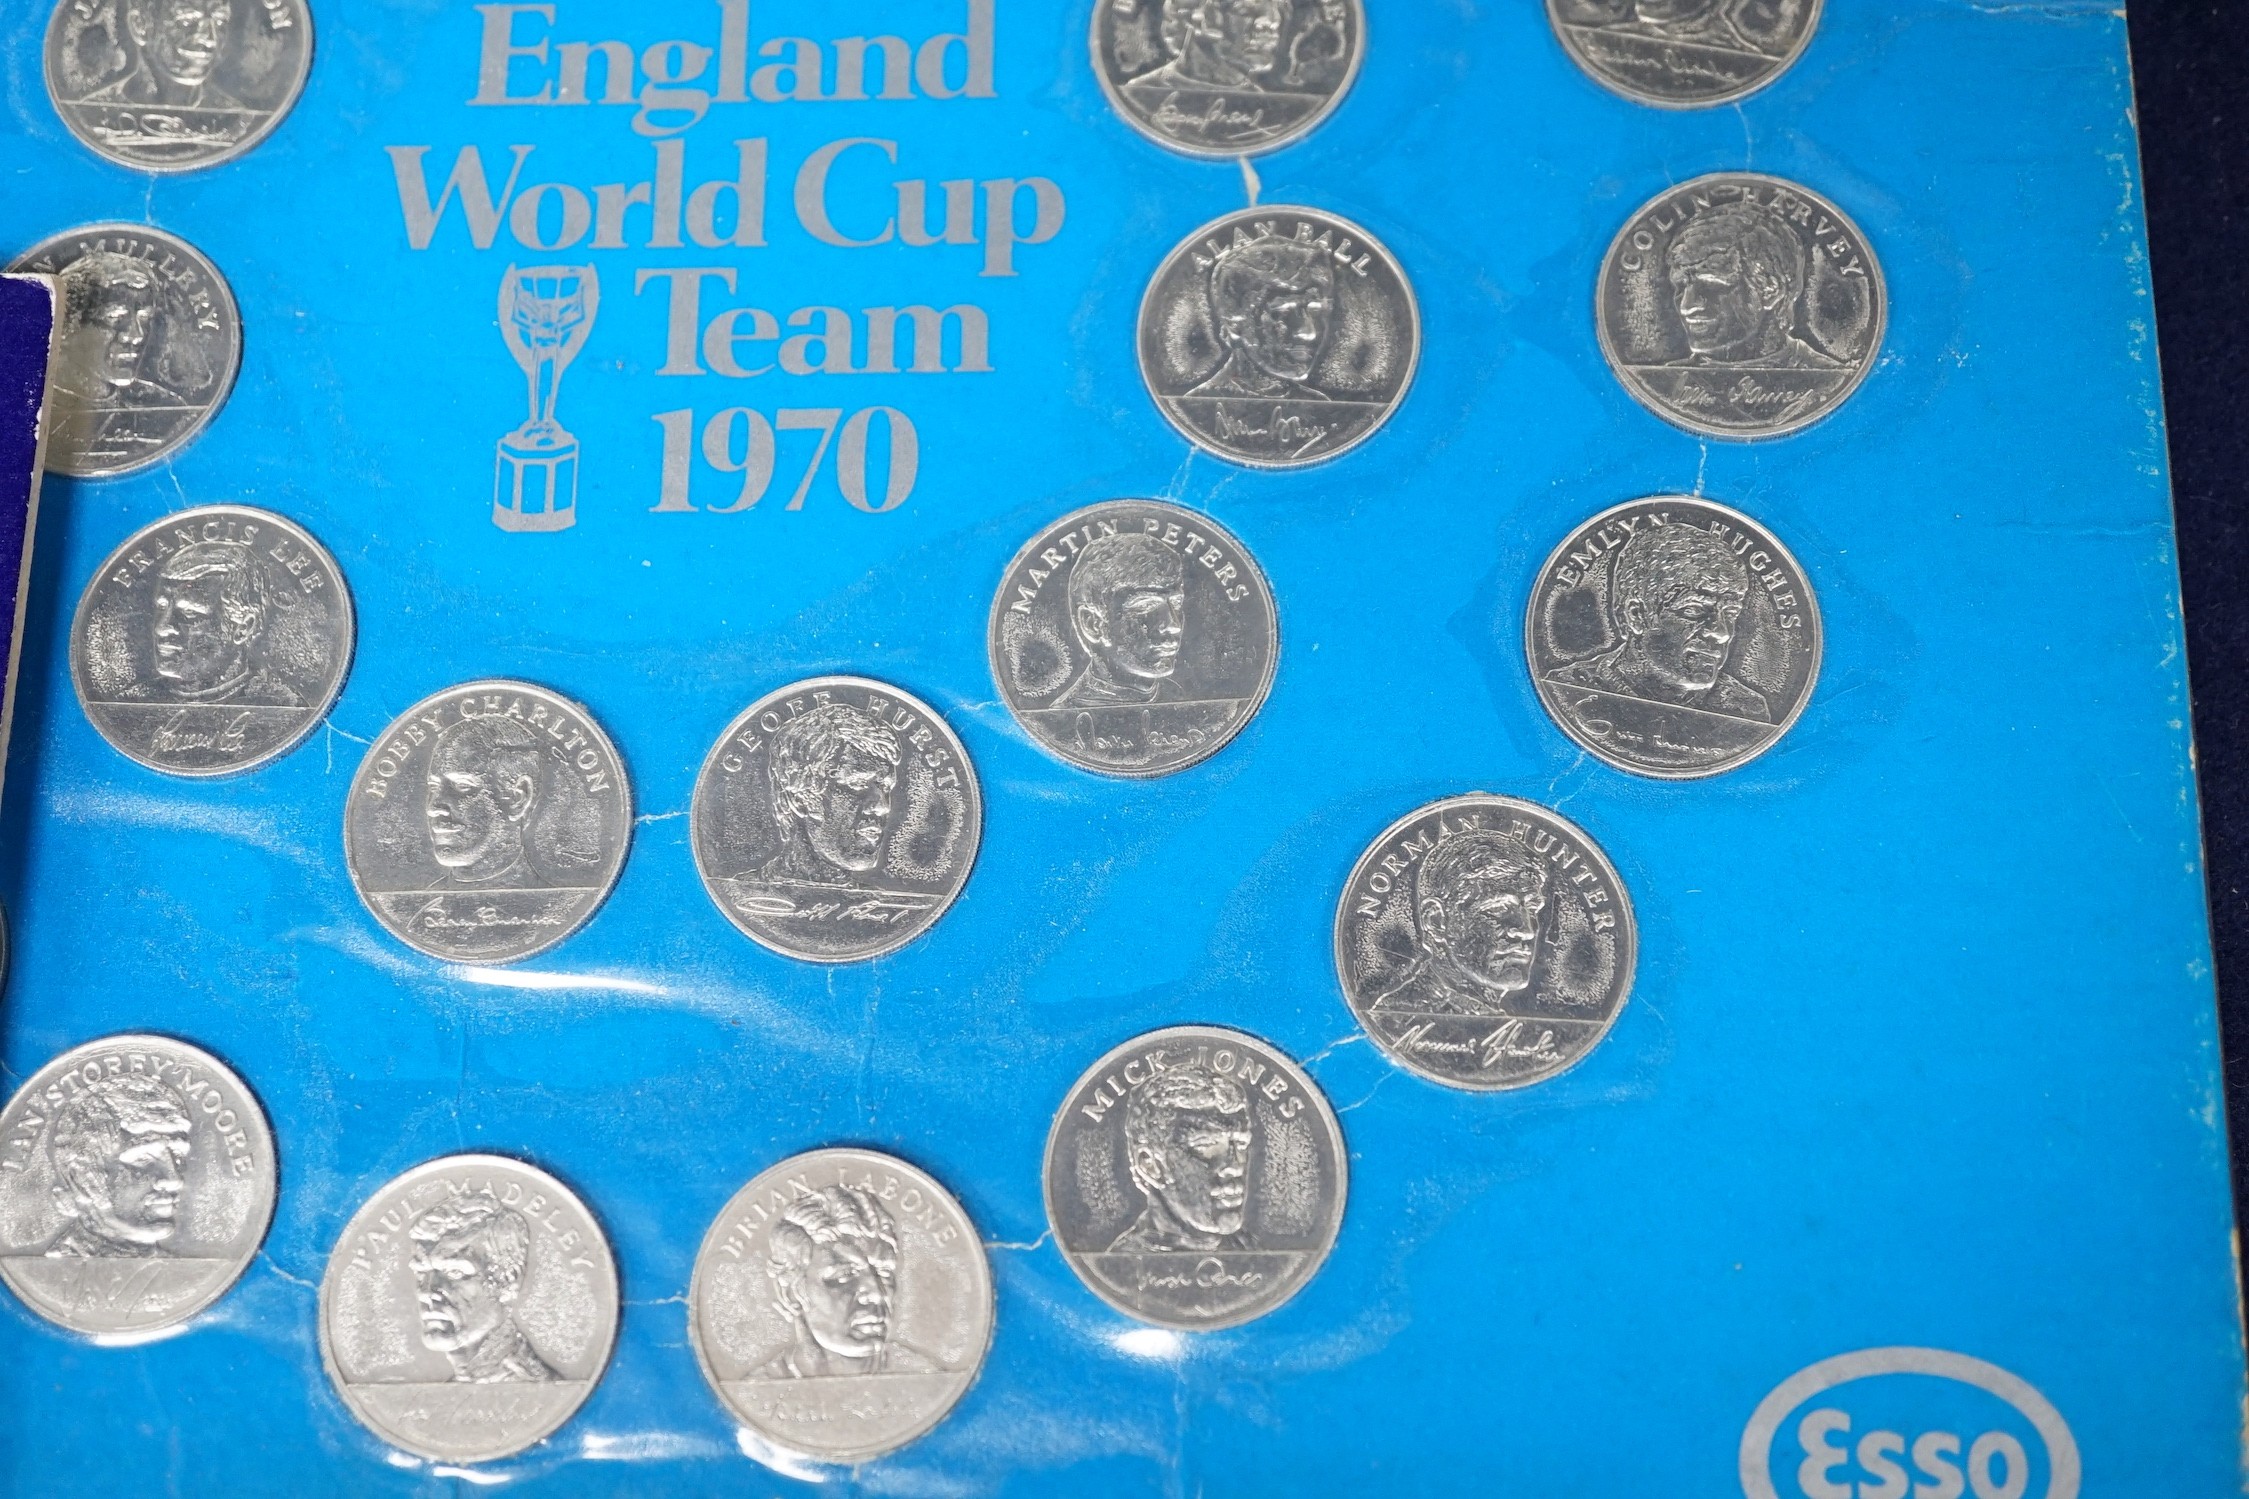 Shell and Esso collector's medals and coins for 1970 World cup, man in flight and FA cup centenary 1872-1972